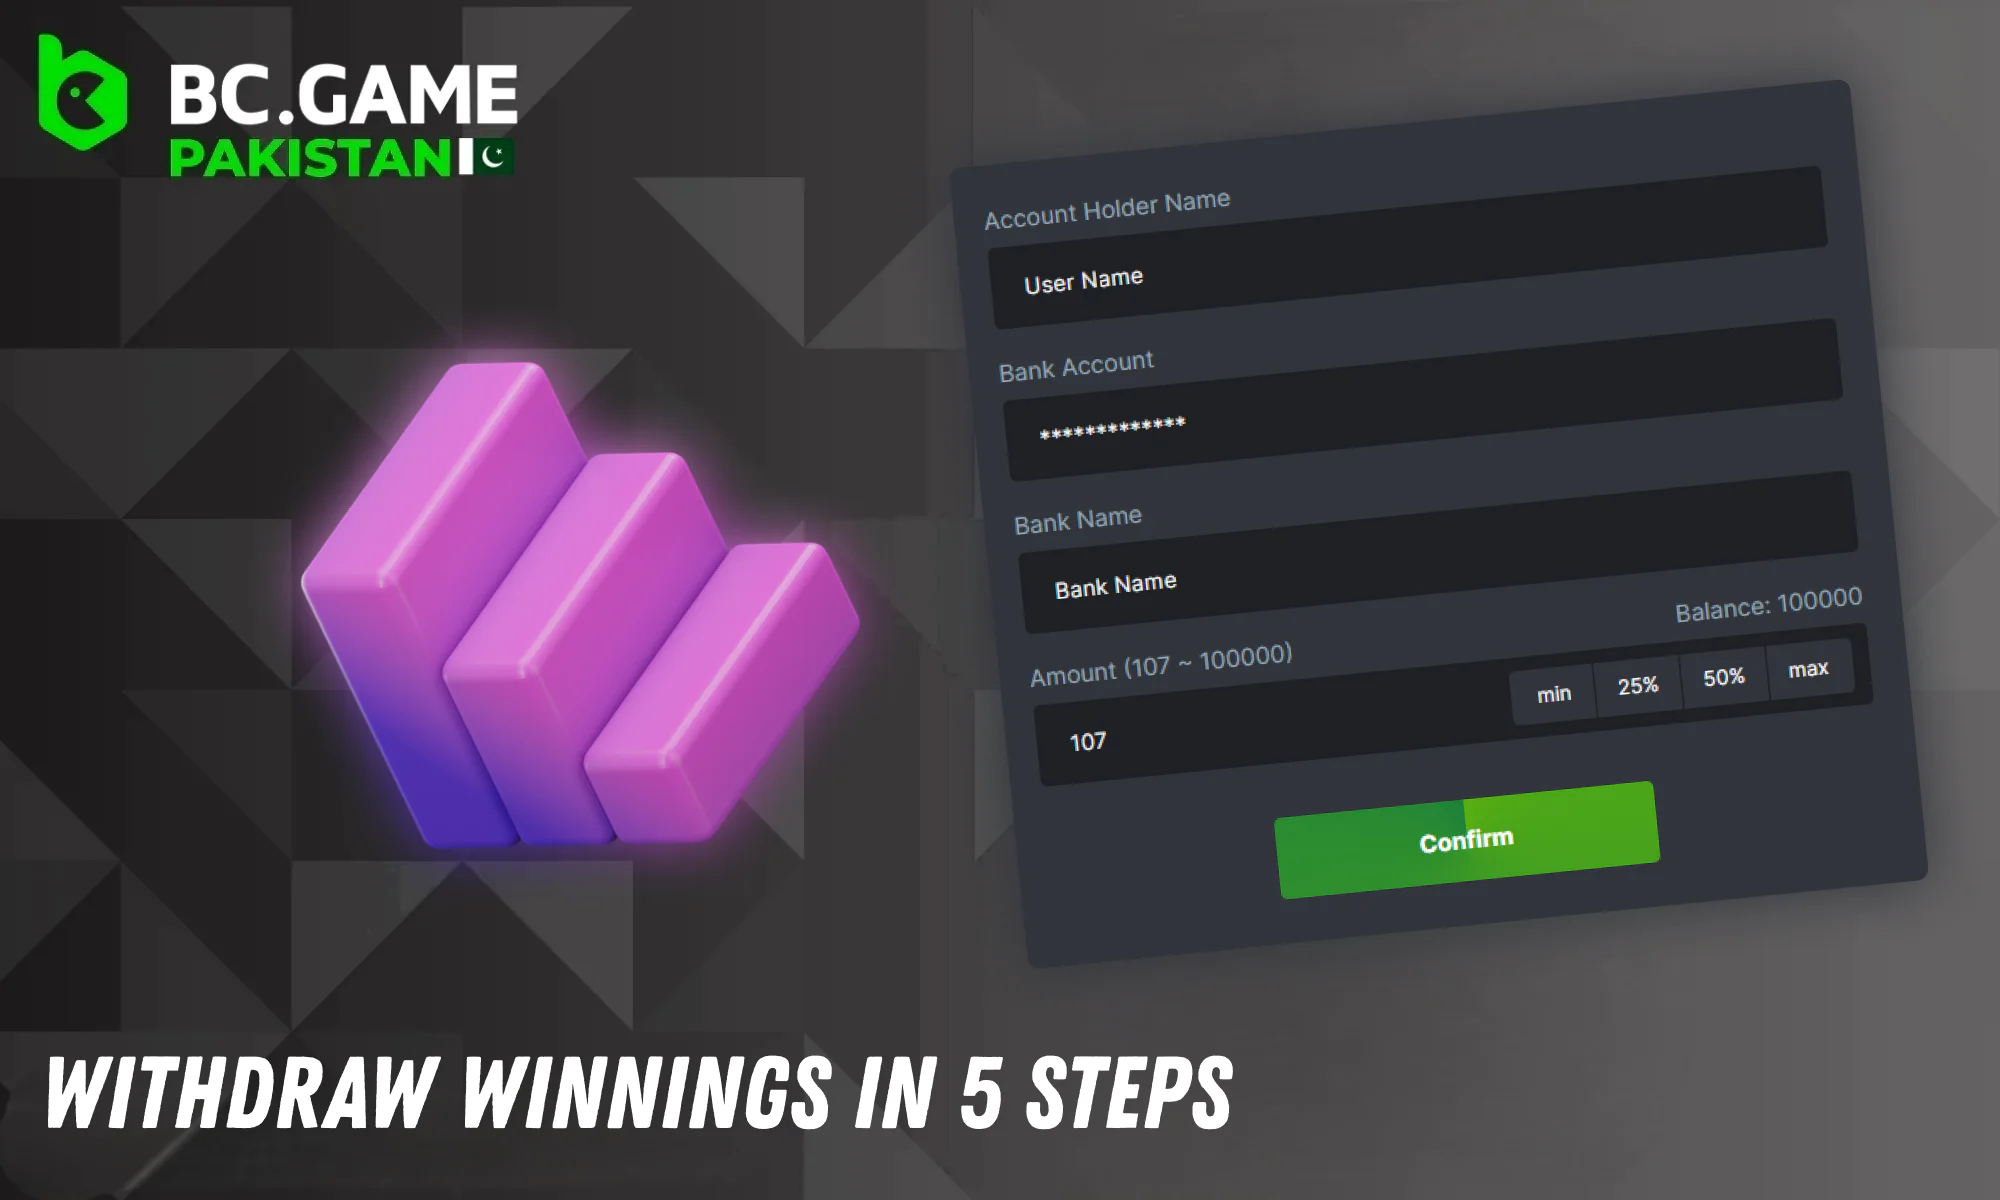 Follow these steps to effortlessly withdraw your winnings from BC Game